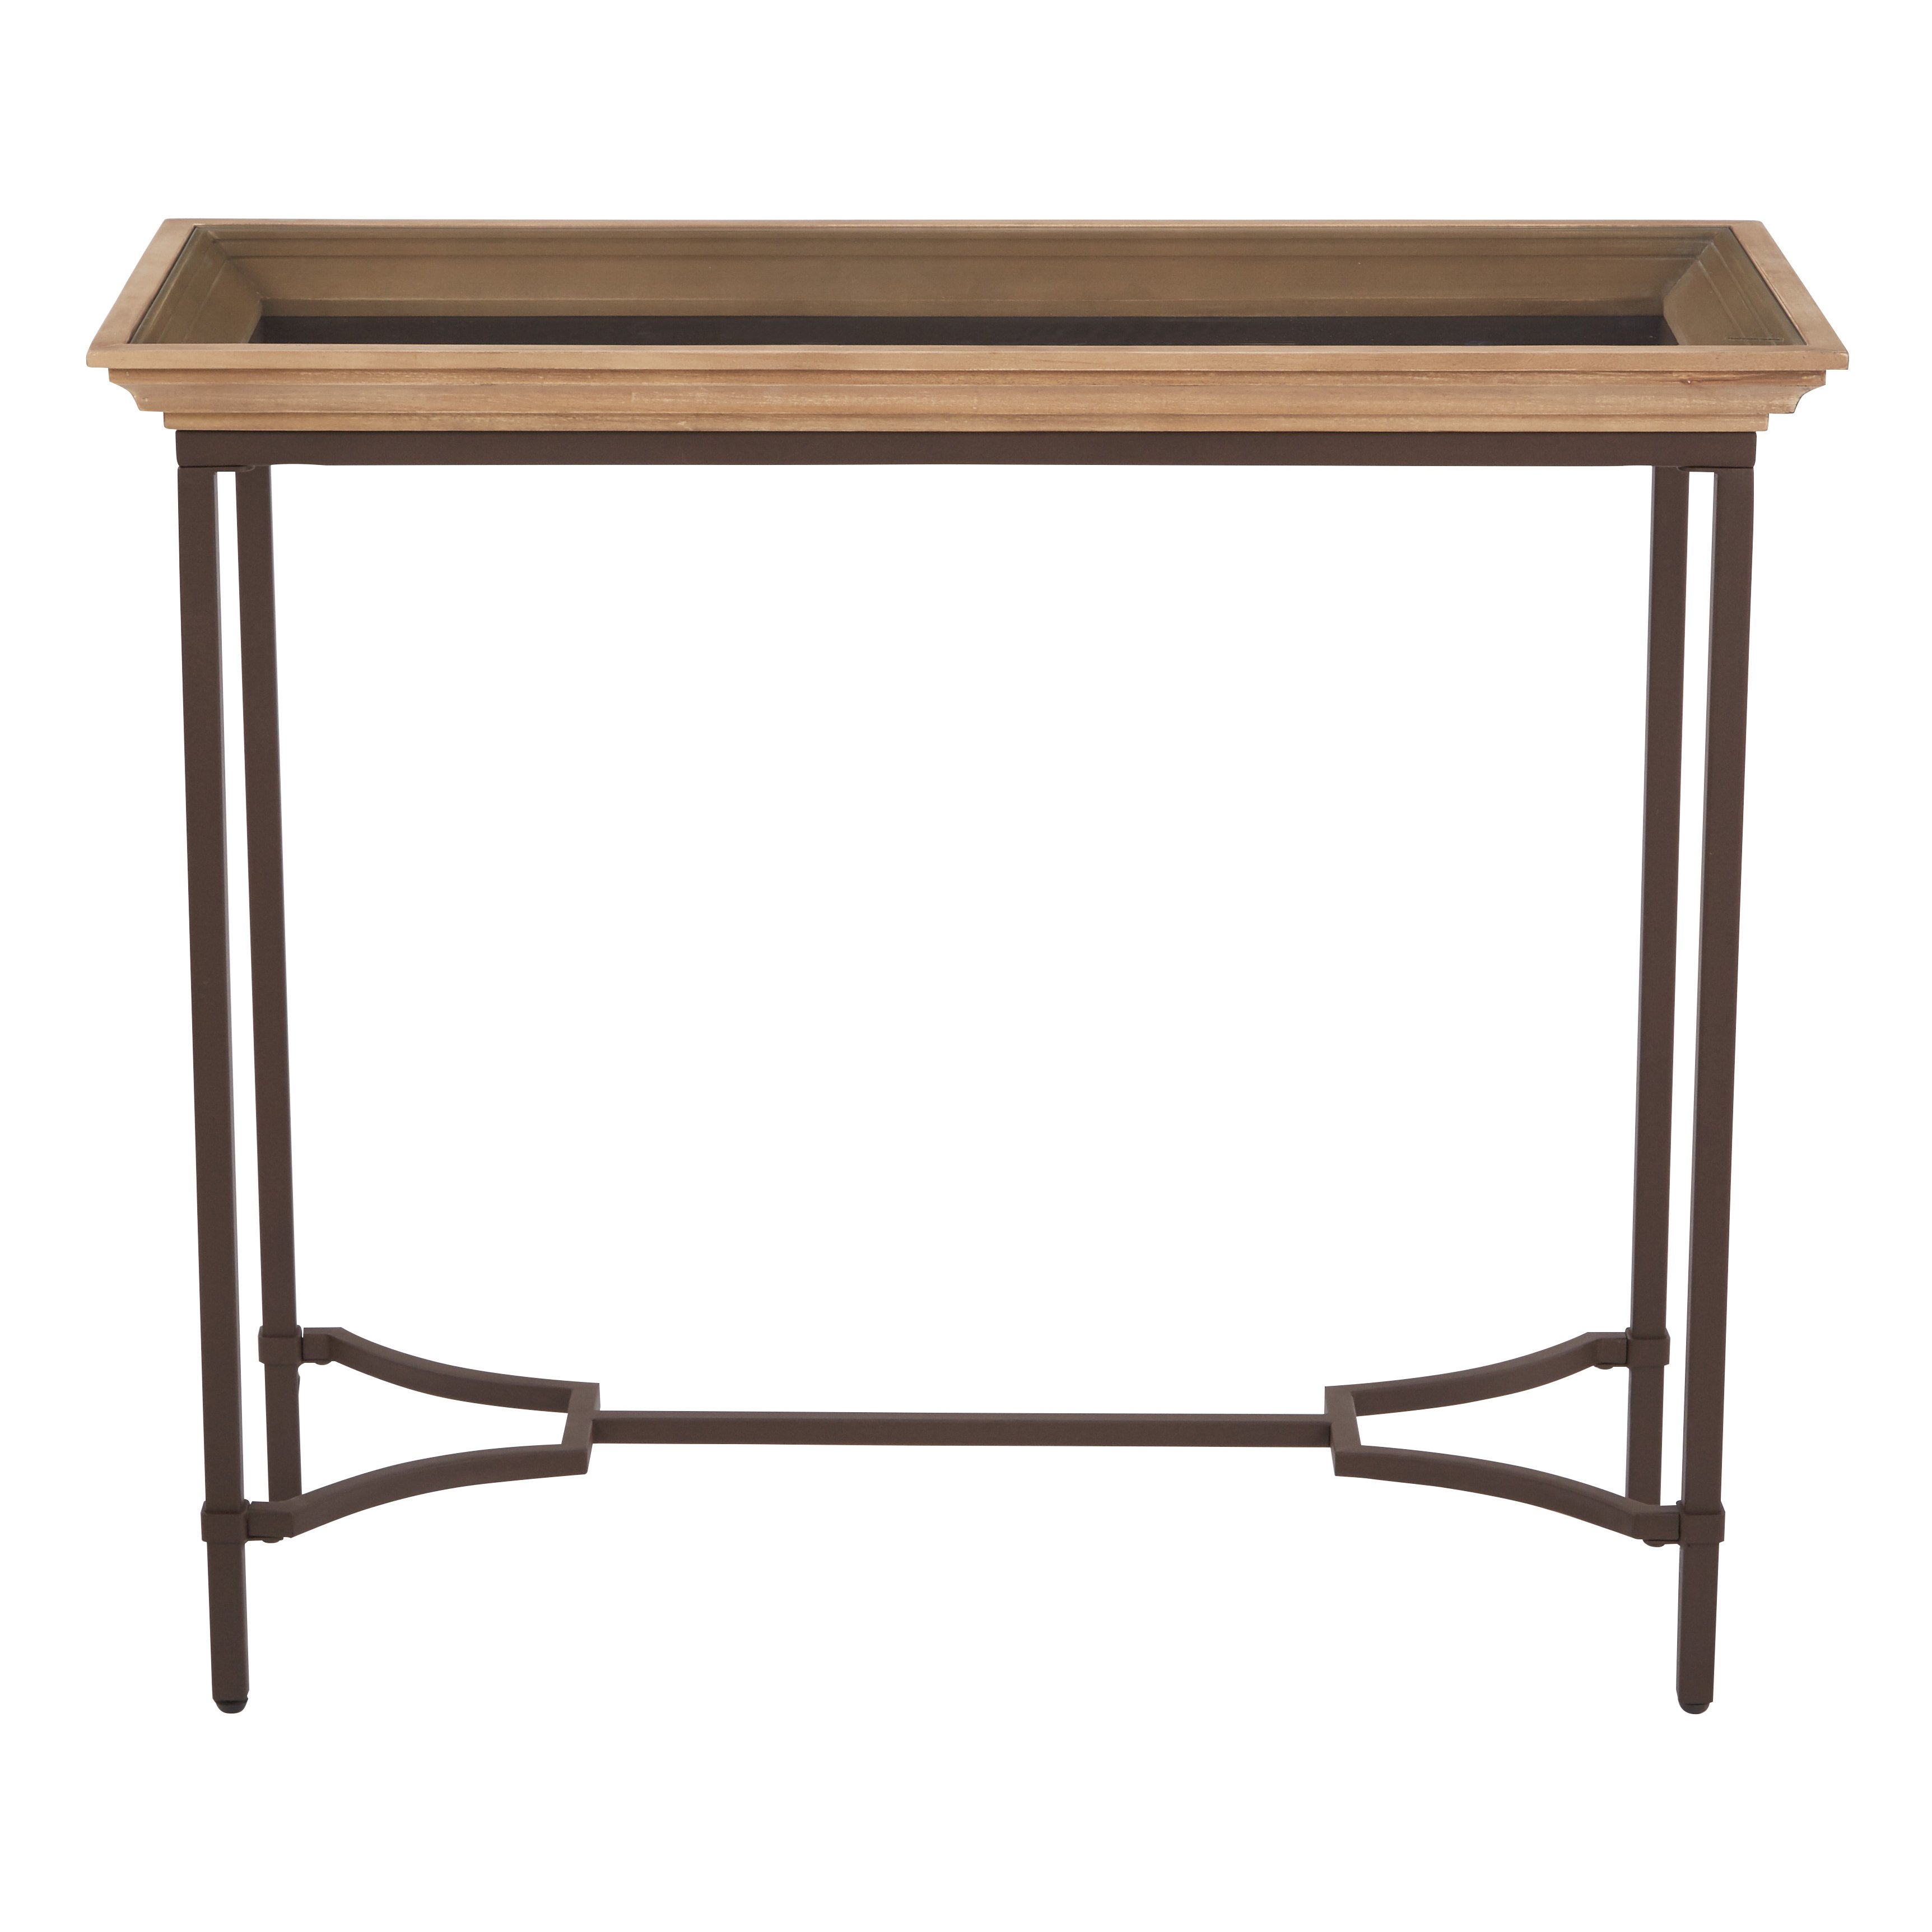 tacoma entryway accent table free shipping today wood and metal end pottery barn style dining patio furniture cushions small kitchen bench set craftsman plans tiffany lighting